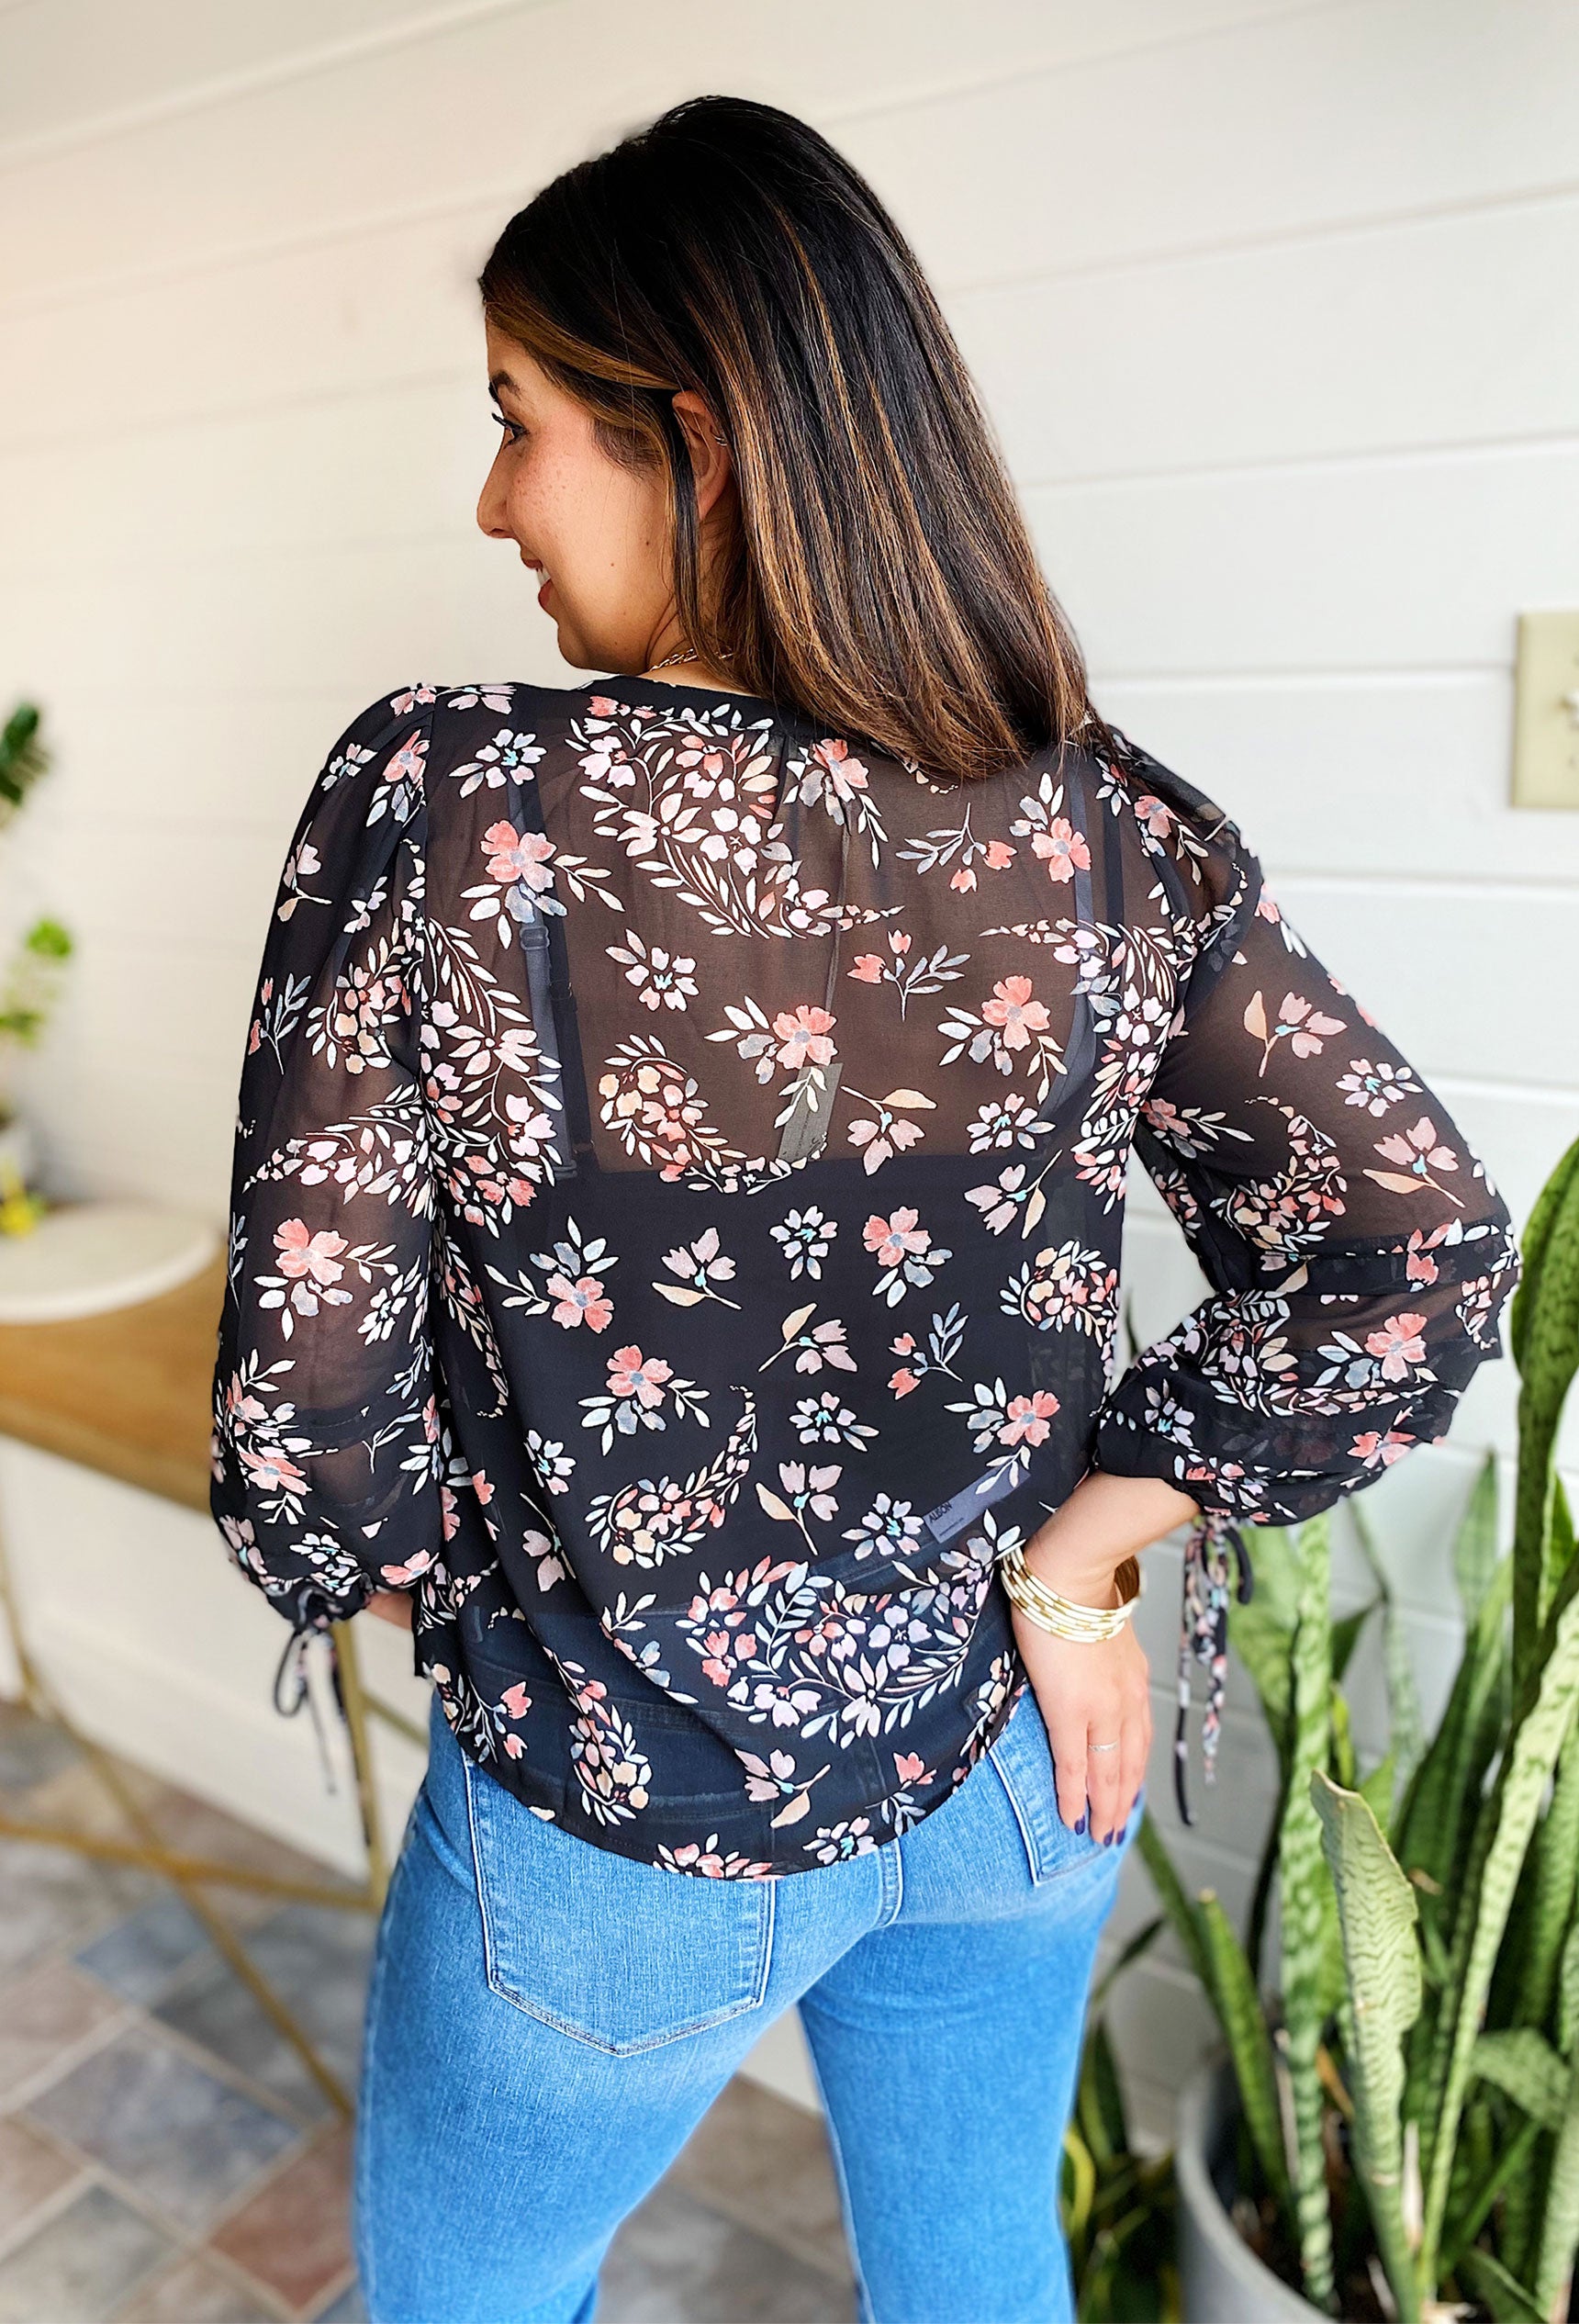 Soho Sweetness Floral Blouse, sheer black top with cami underneath, button up floral design\